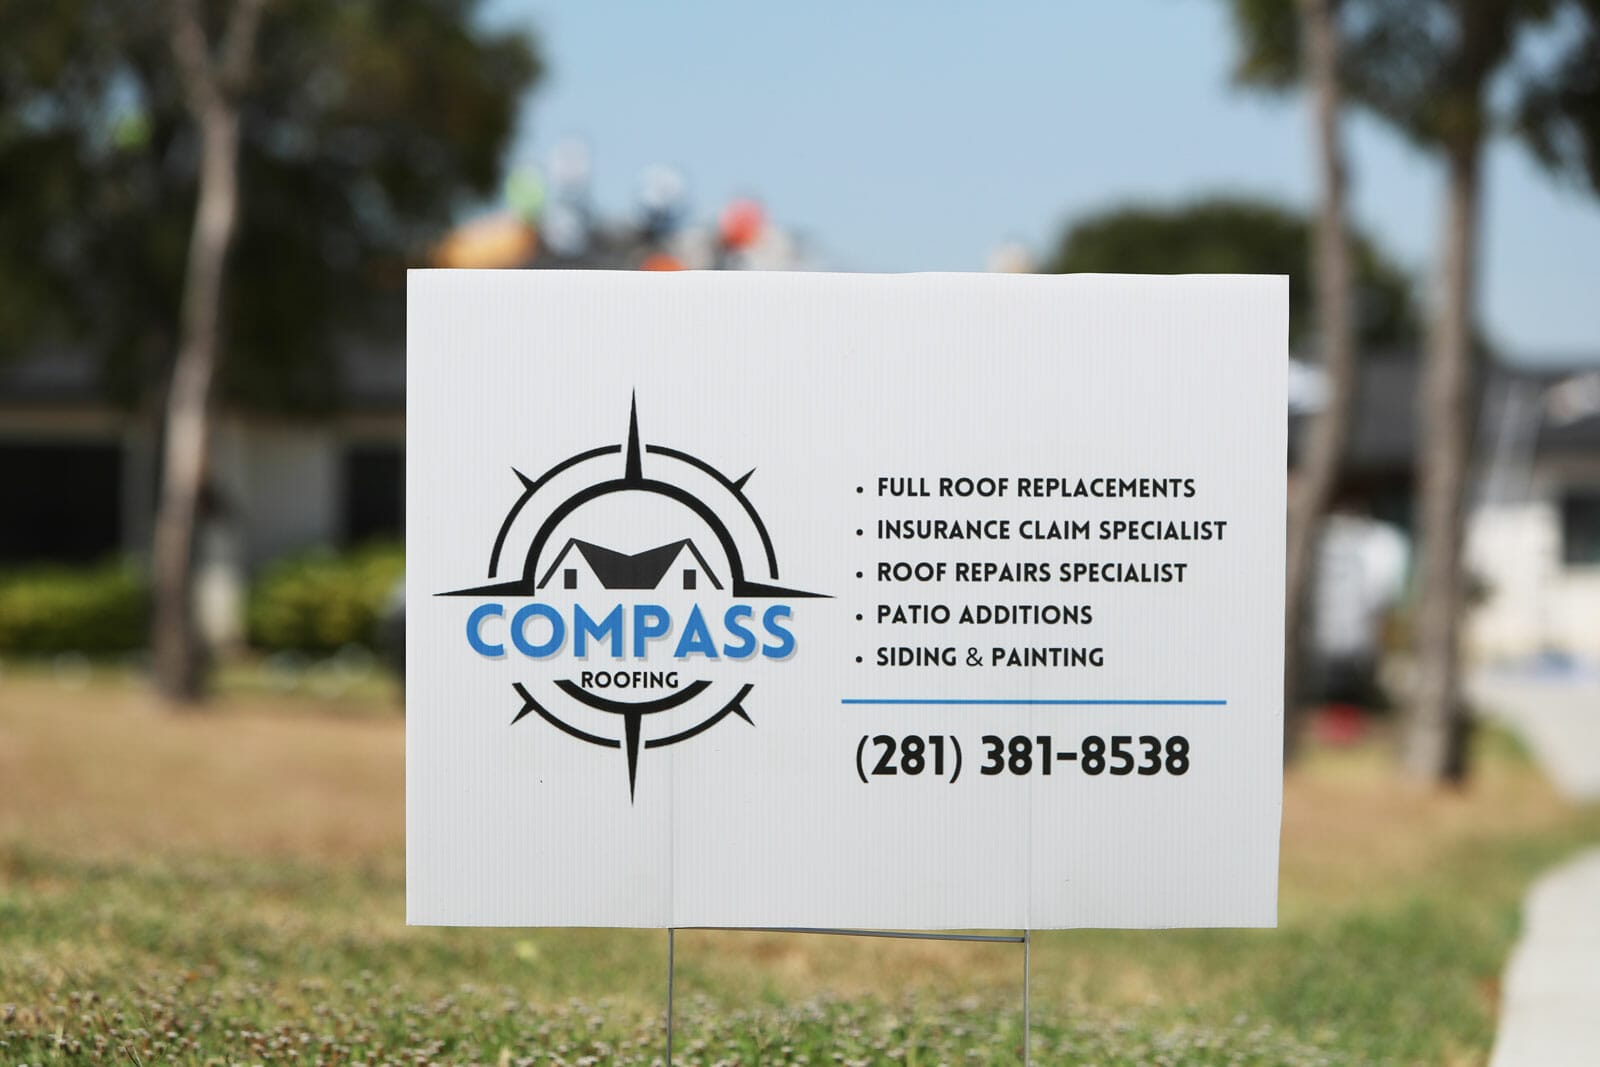 Compass Roofing TX - roofers near me